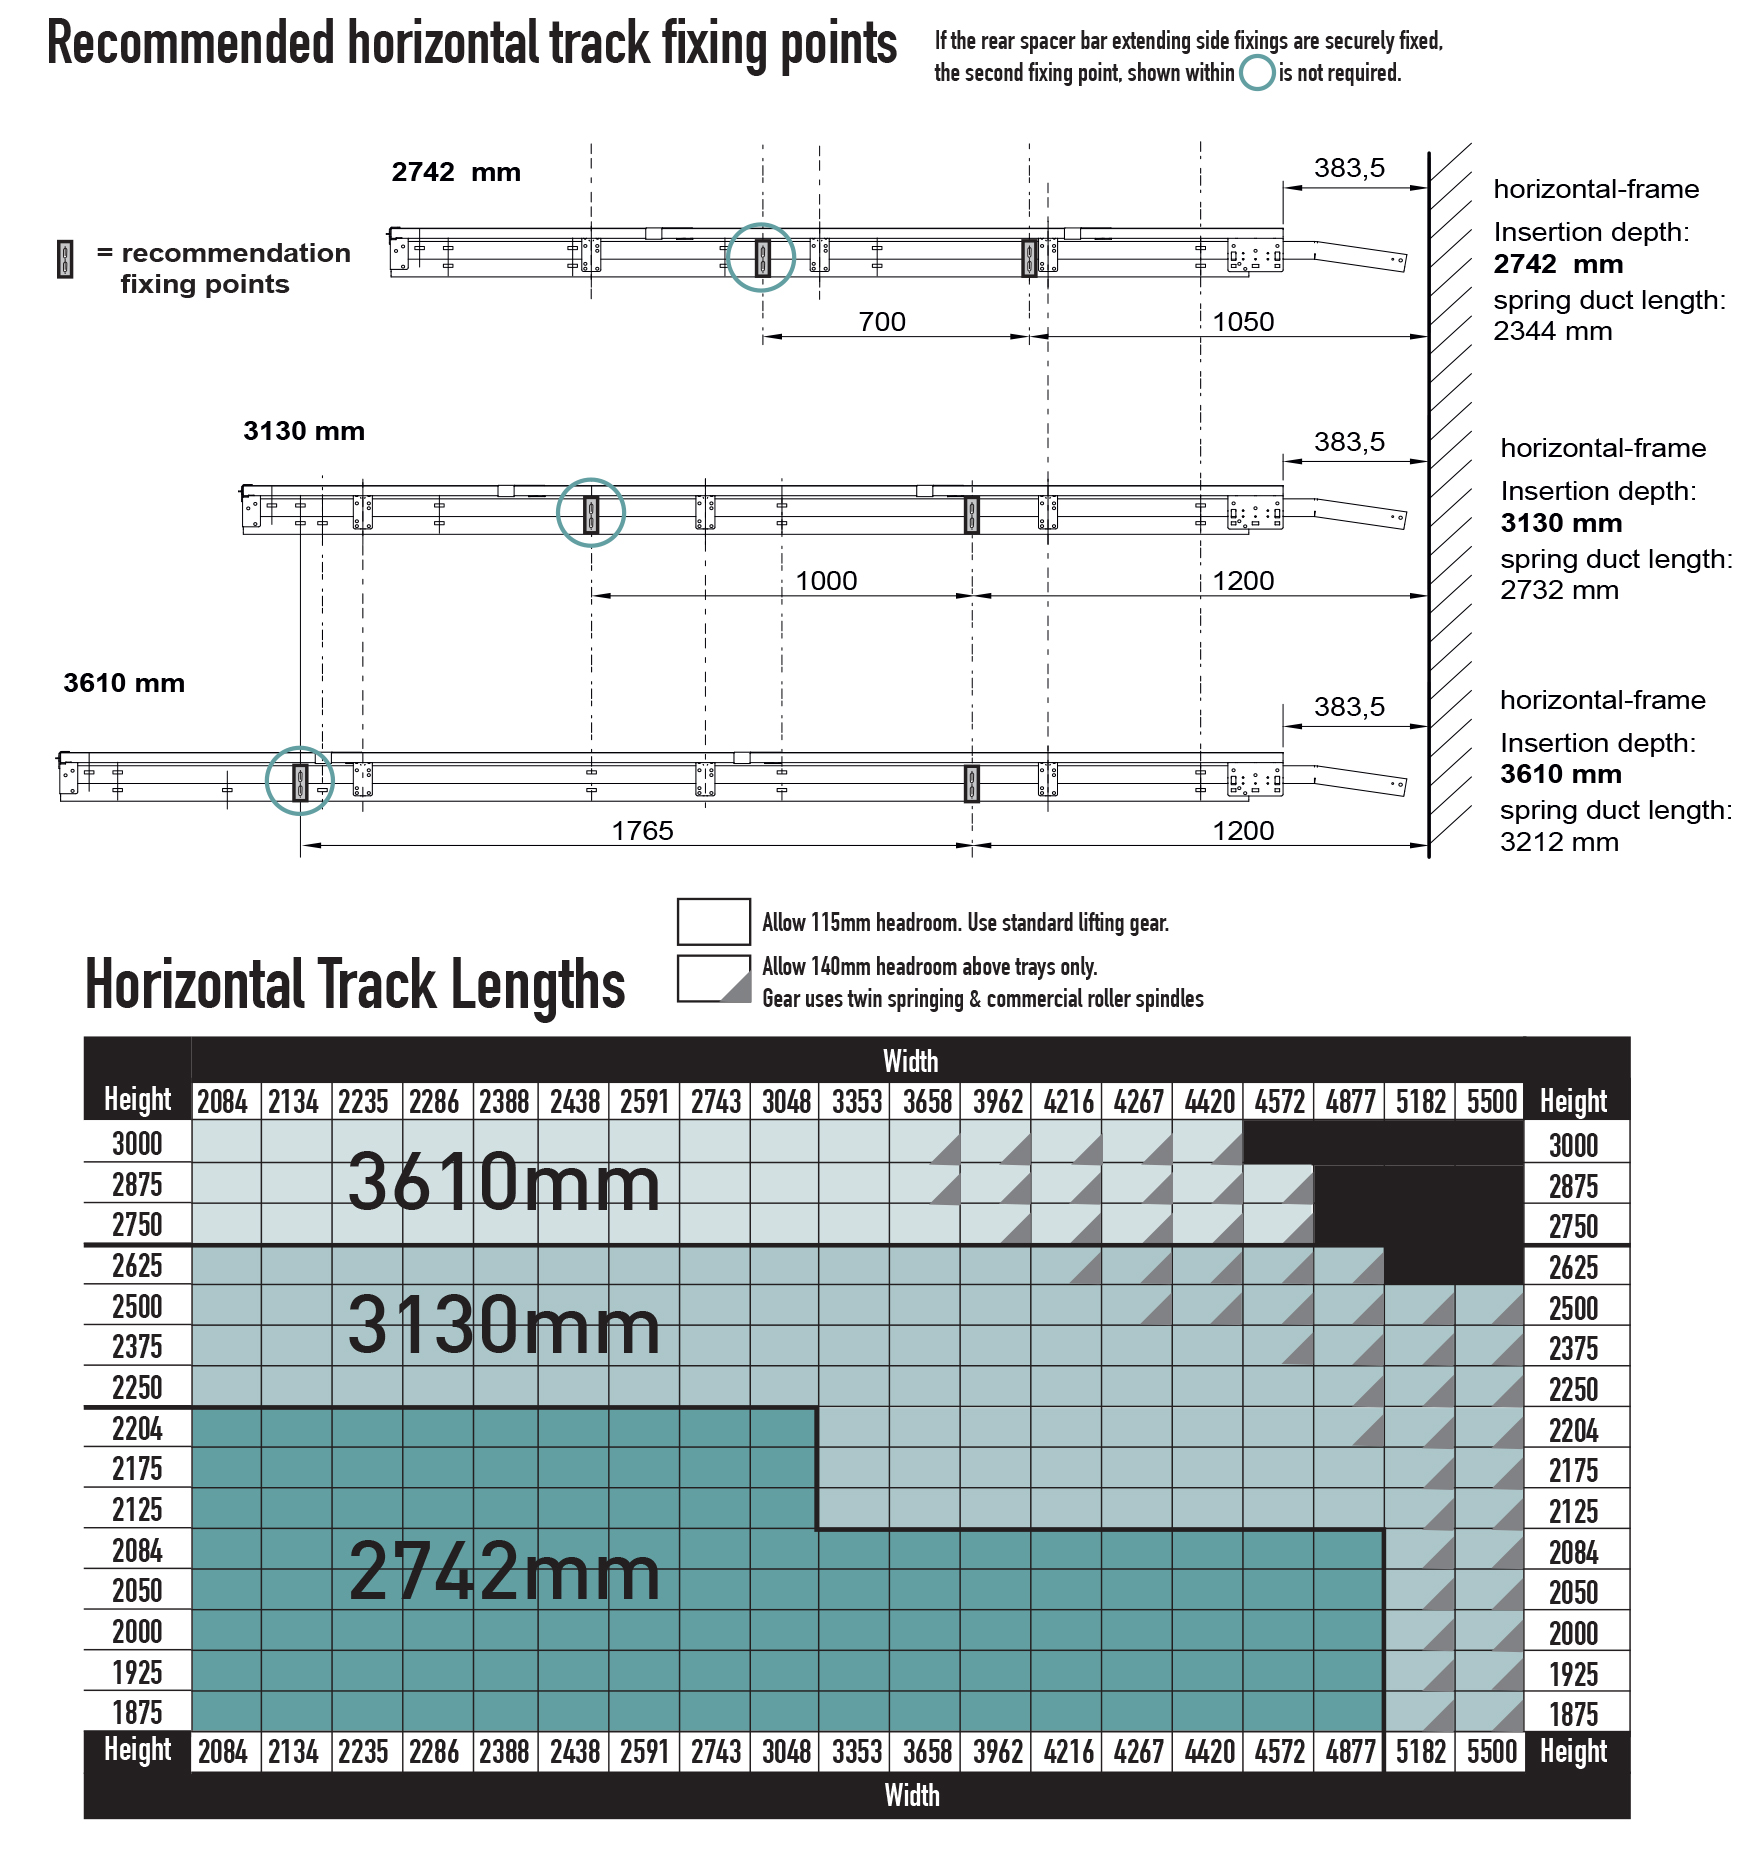 Recommended horizontal track fixing points